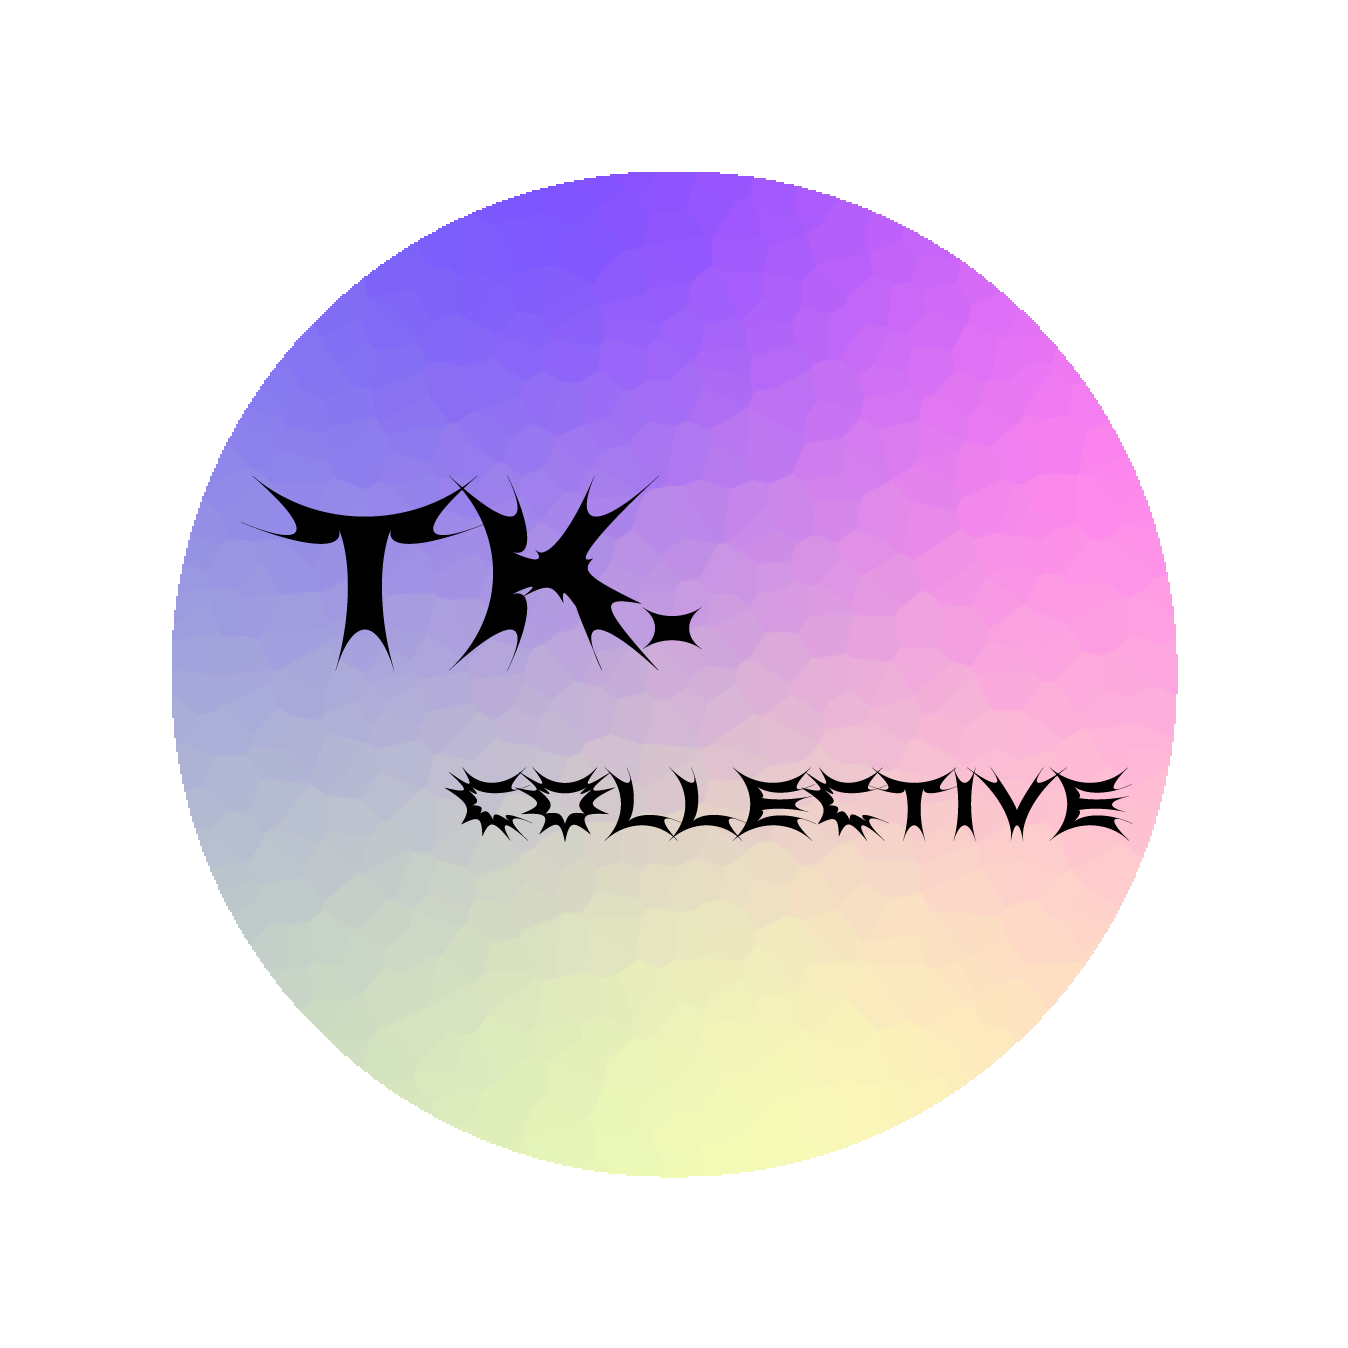 tk.collective